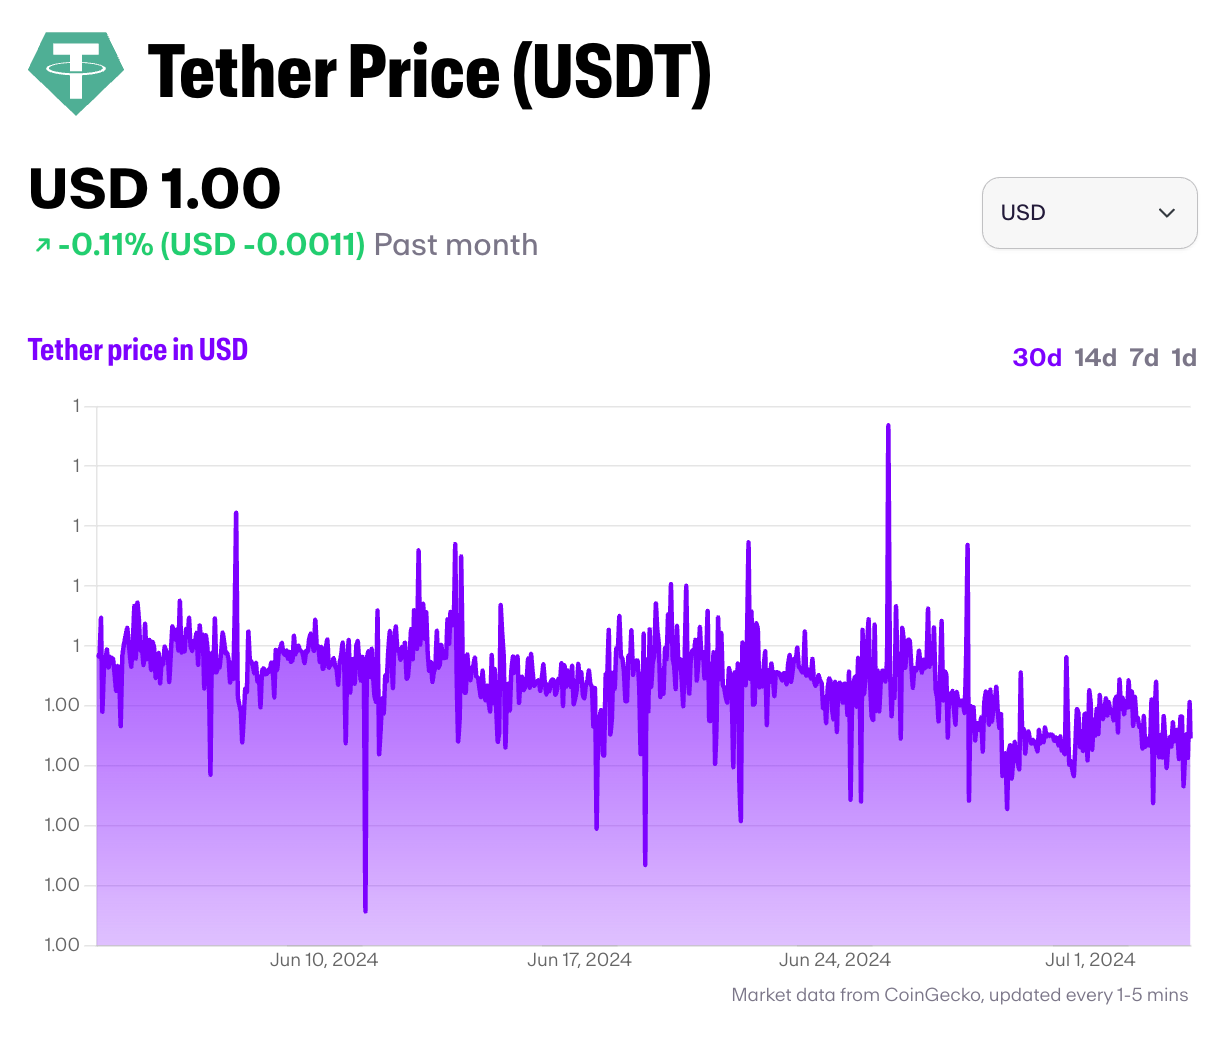 A chart of the USDT price over time.